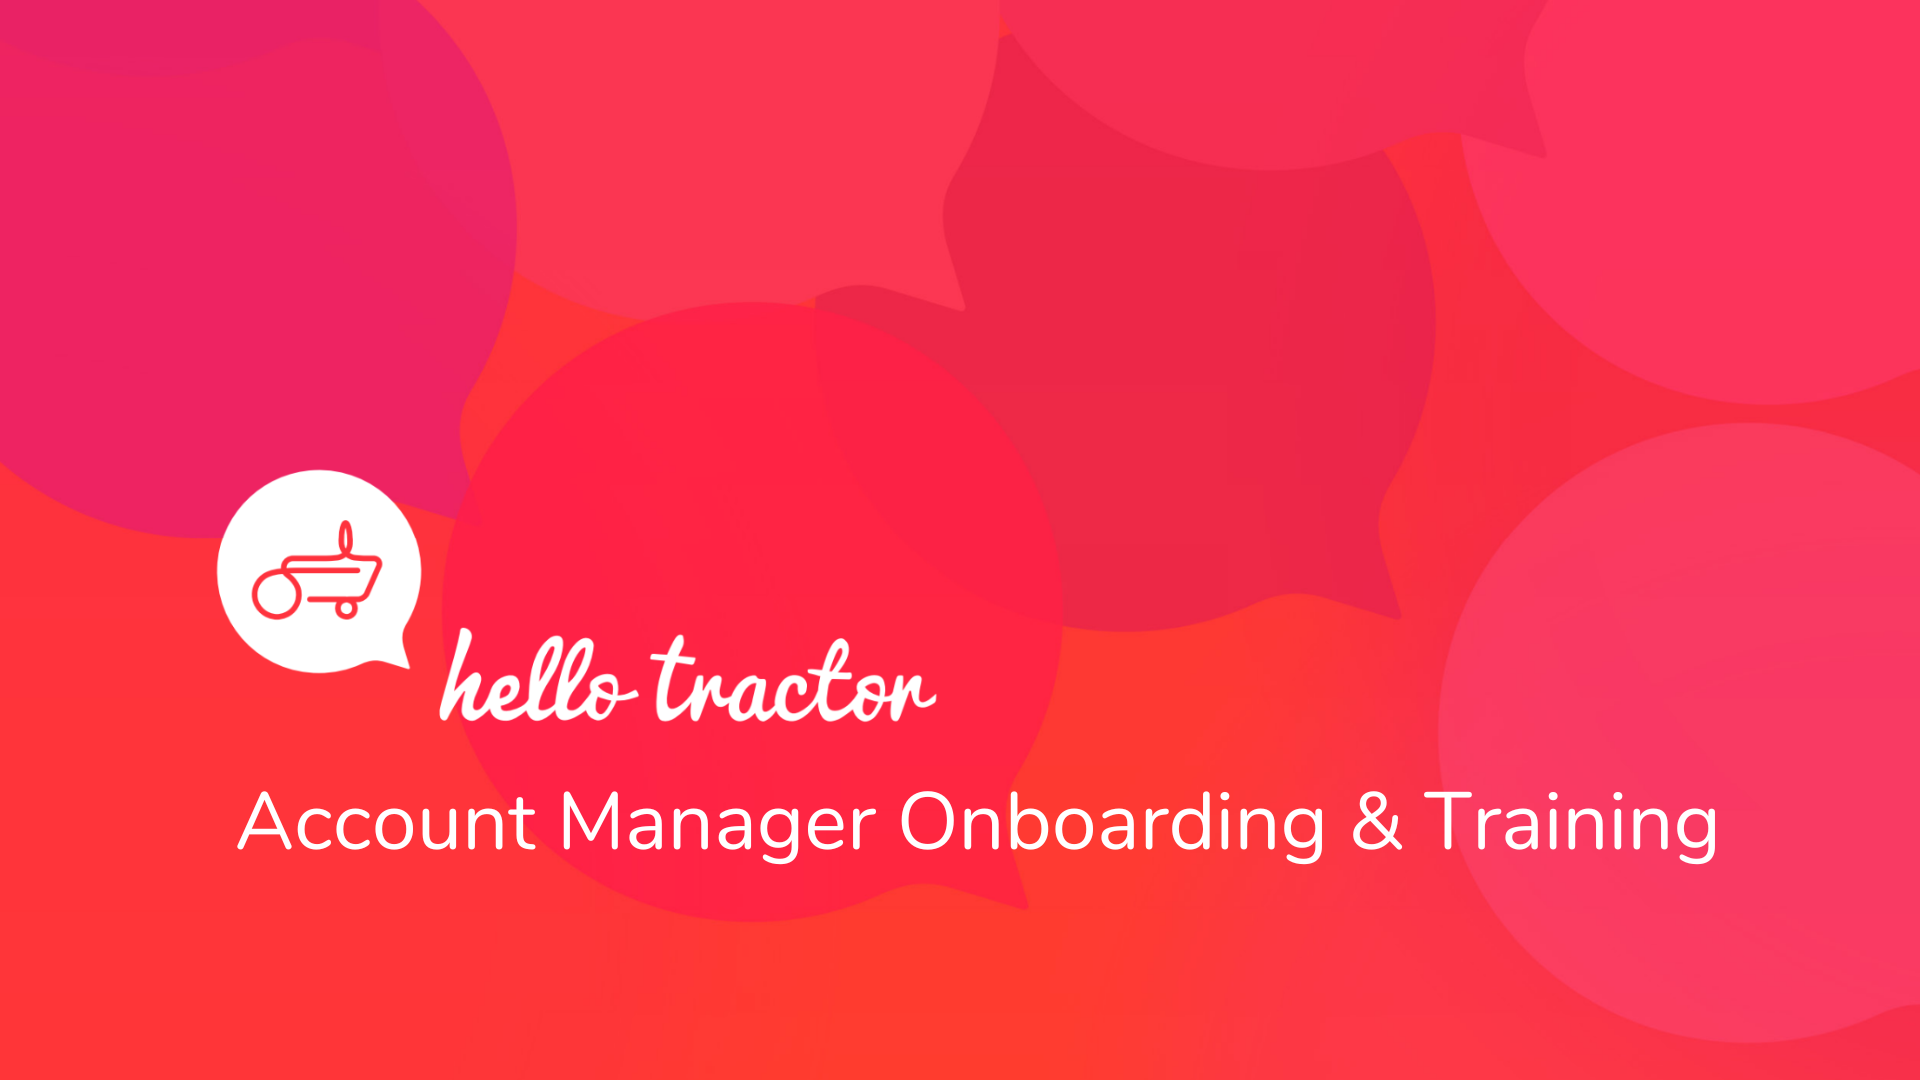 Account Manager Onboarding & Training